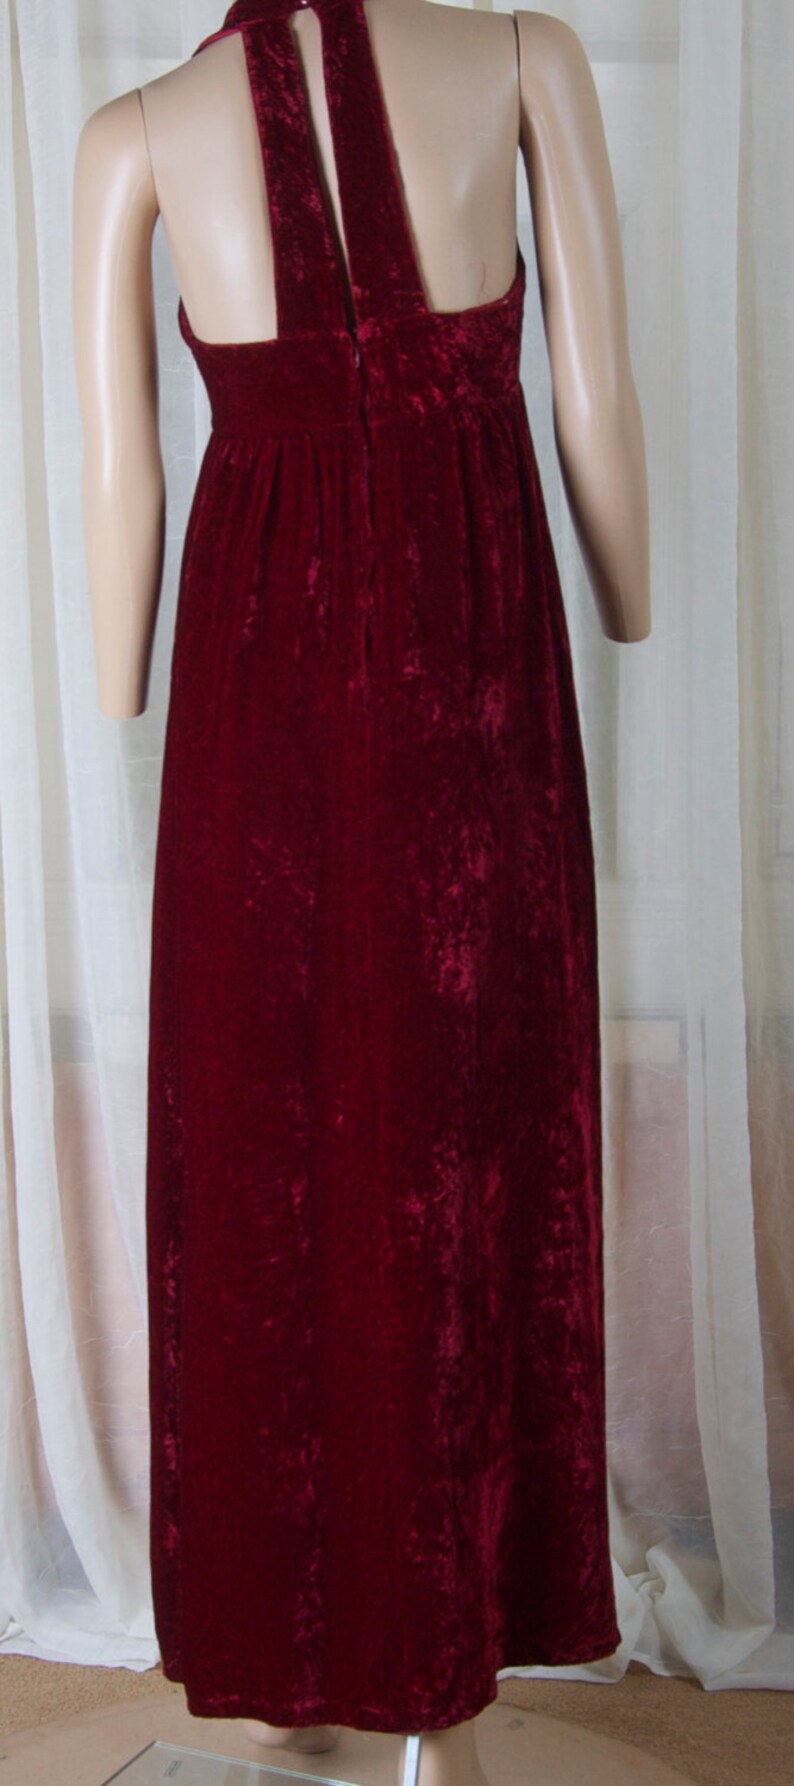 Cranberry colored crushed velvet full length gown | Etsy